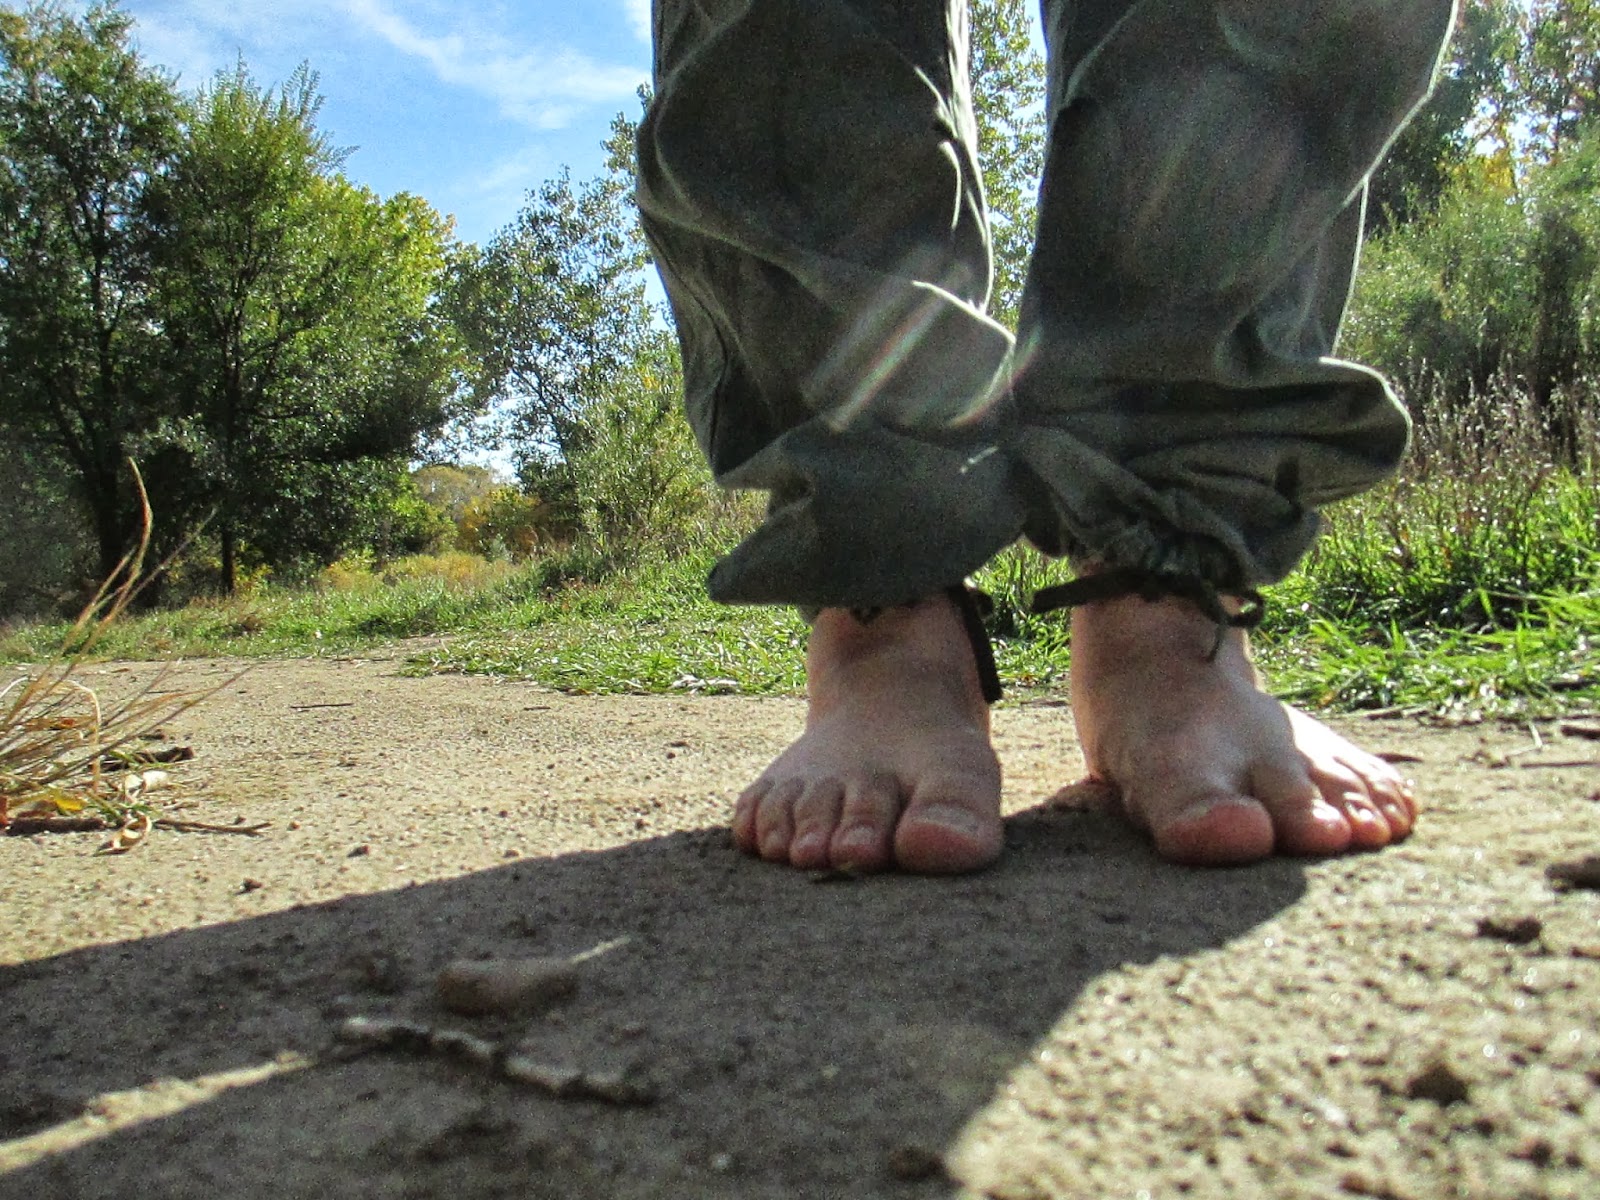 ALMOST BAREFOOT: Barefoot Lifestyle-Real Meaning